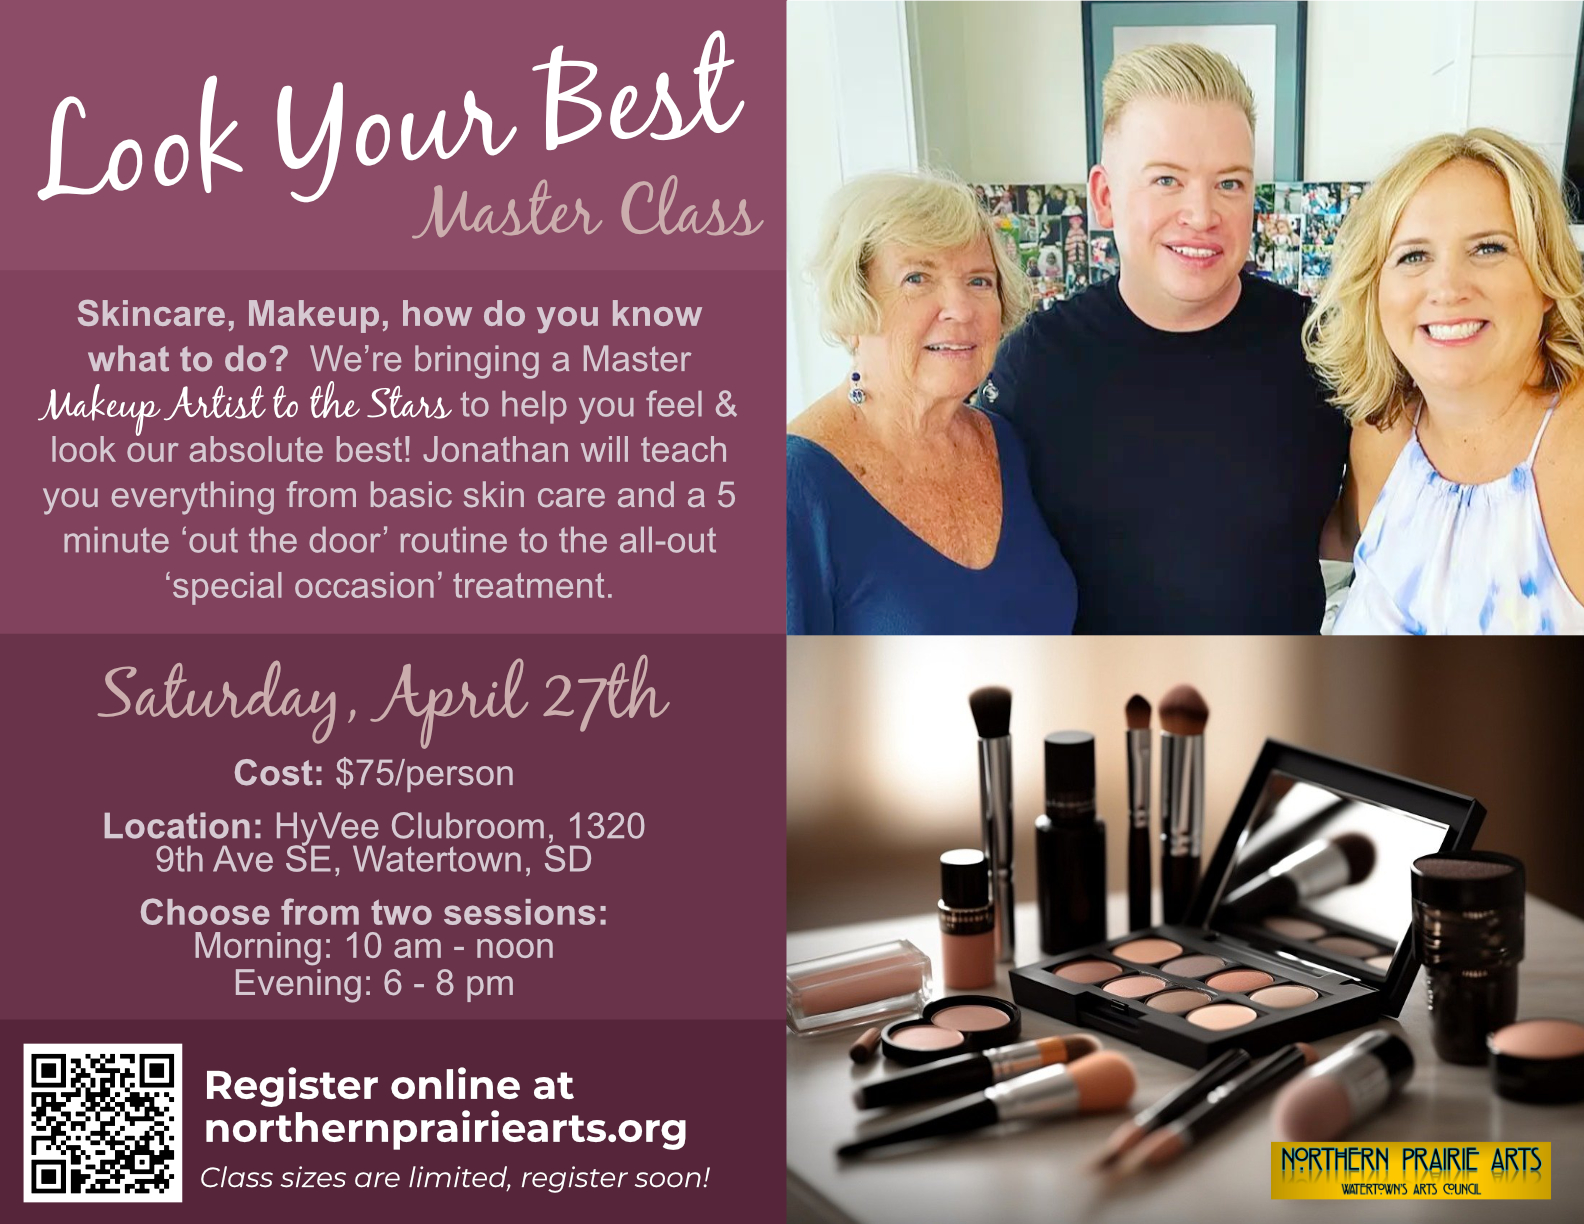 Look Your Best - Master Class